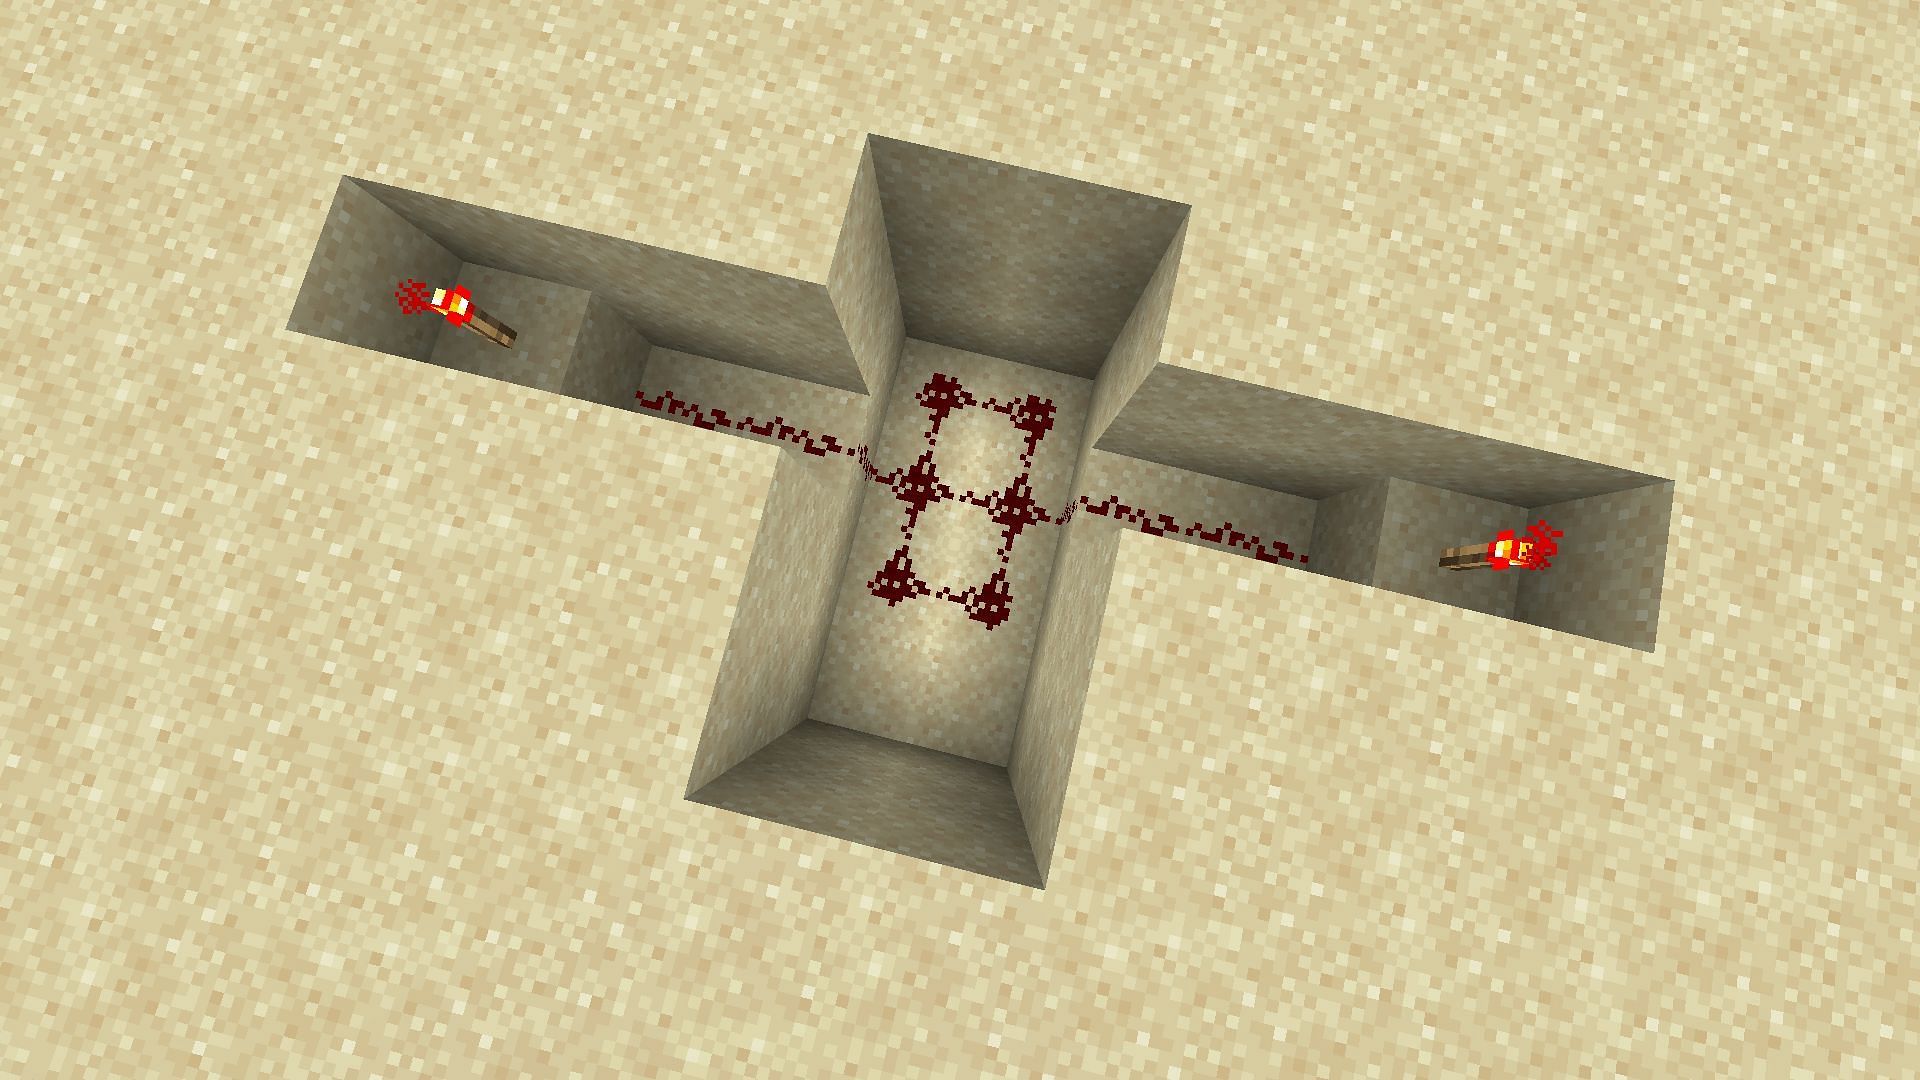 The redstone dust and torches placed into the hole (Image via Minecraft)